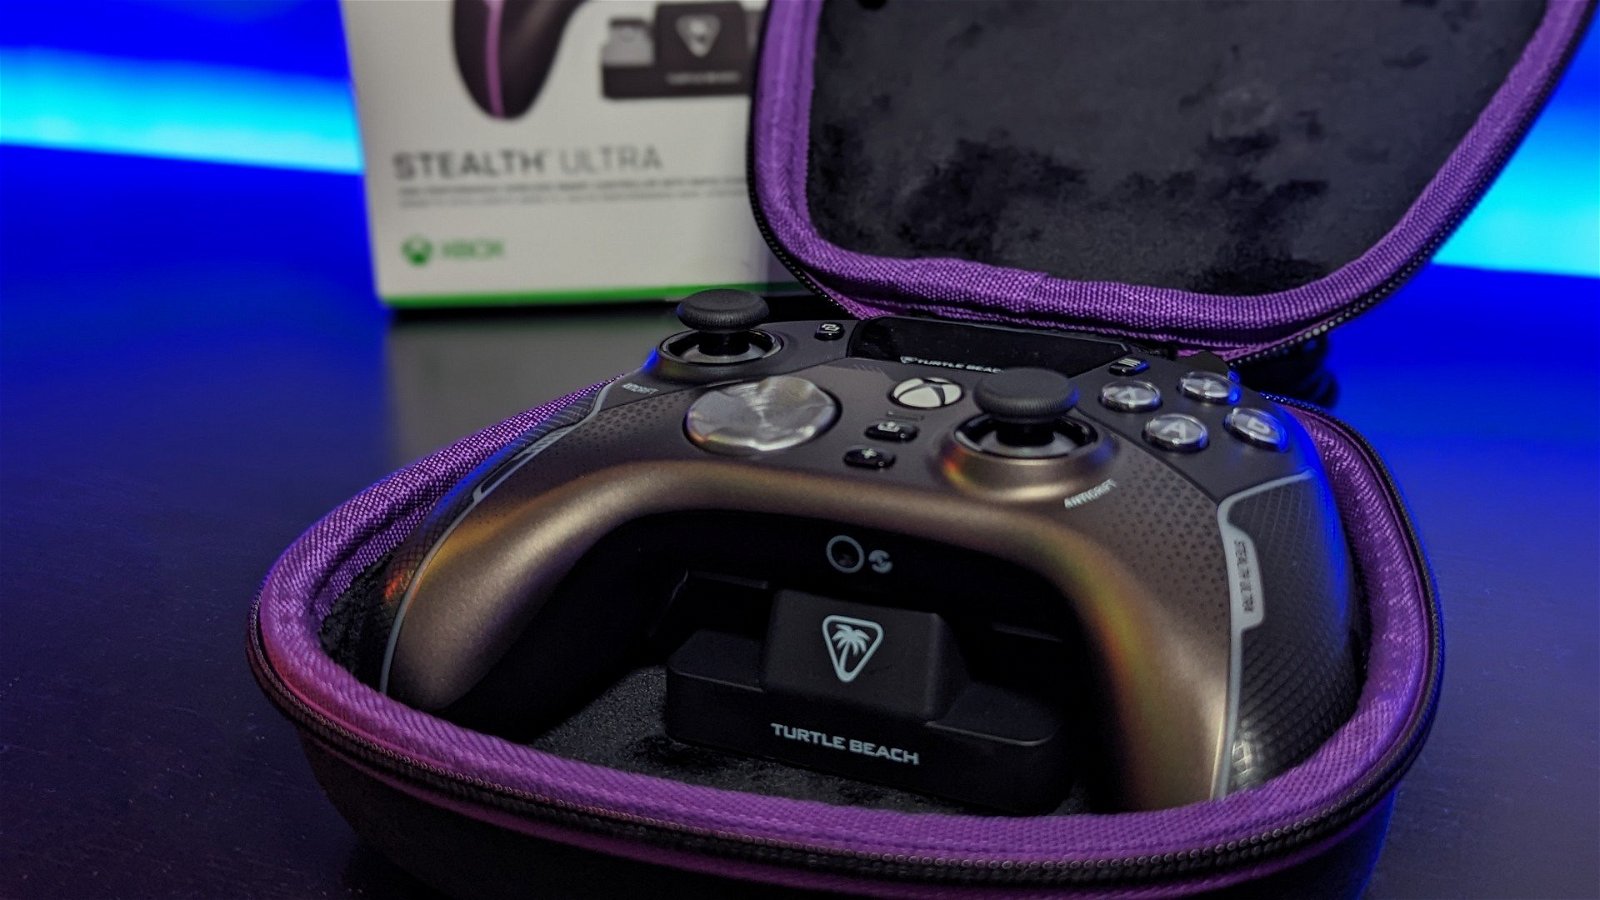 Turtle Beach Stealth™ Ultra – Wireless Controller with Rapid Charge Dock